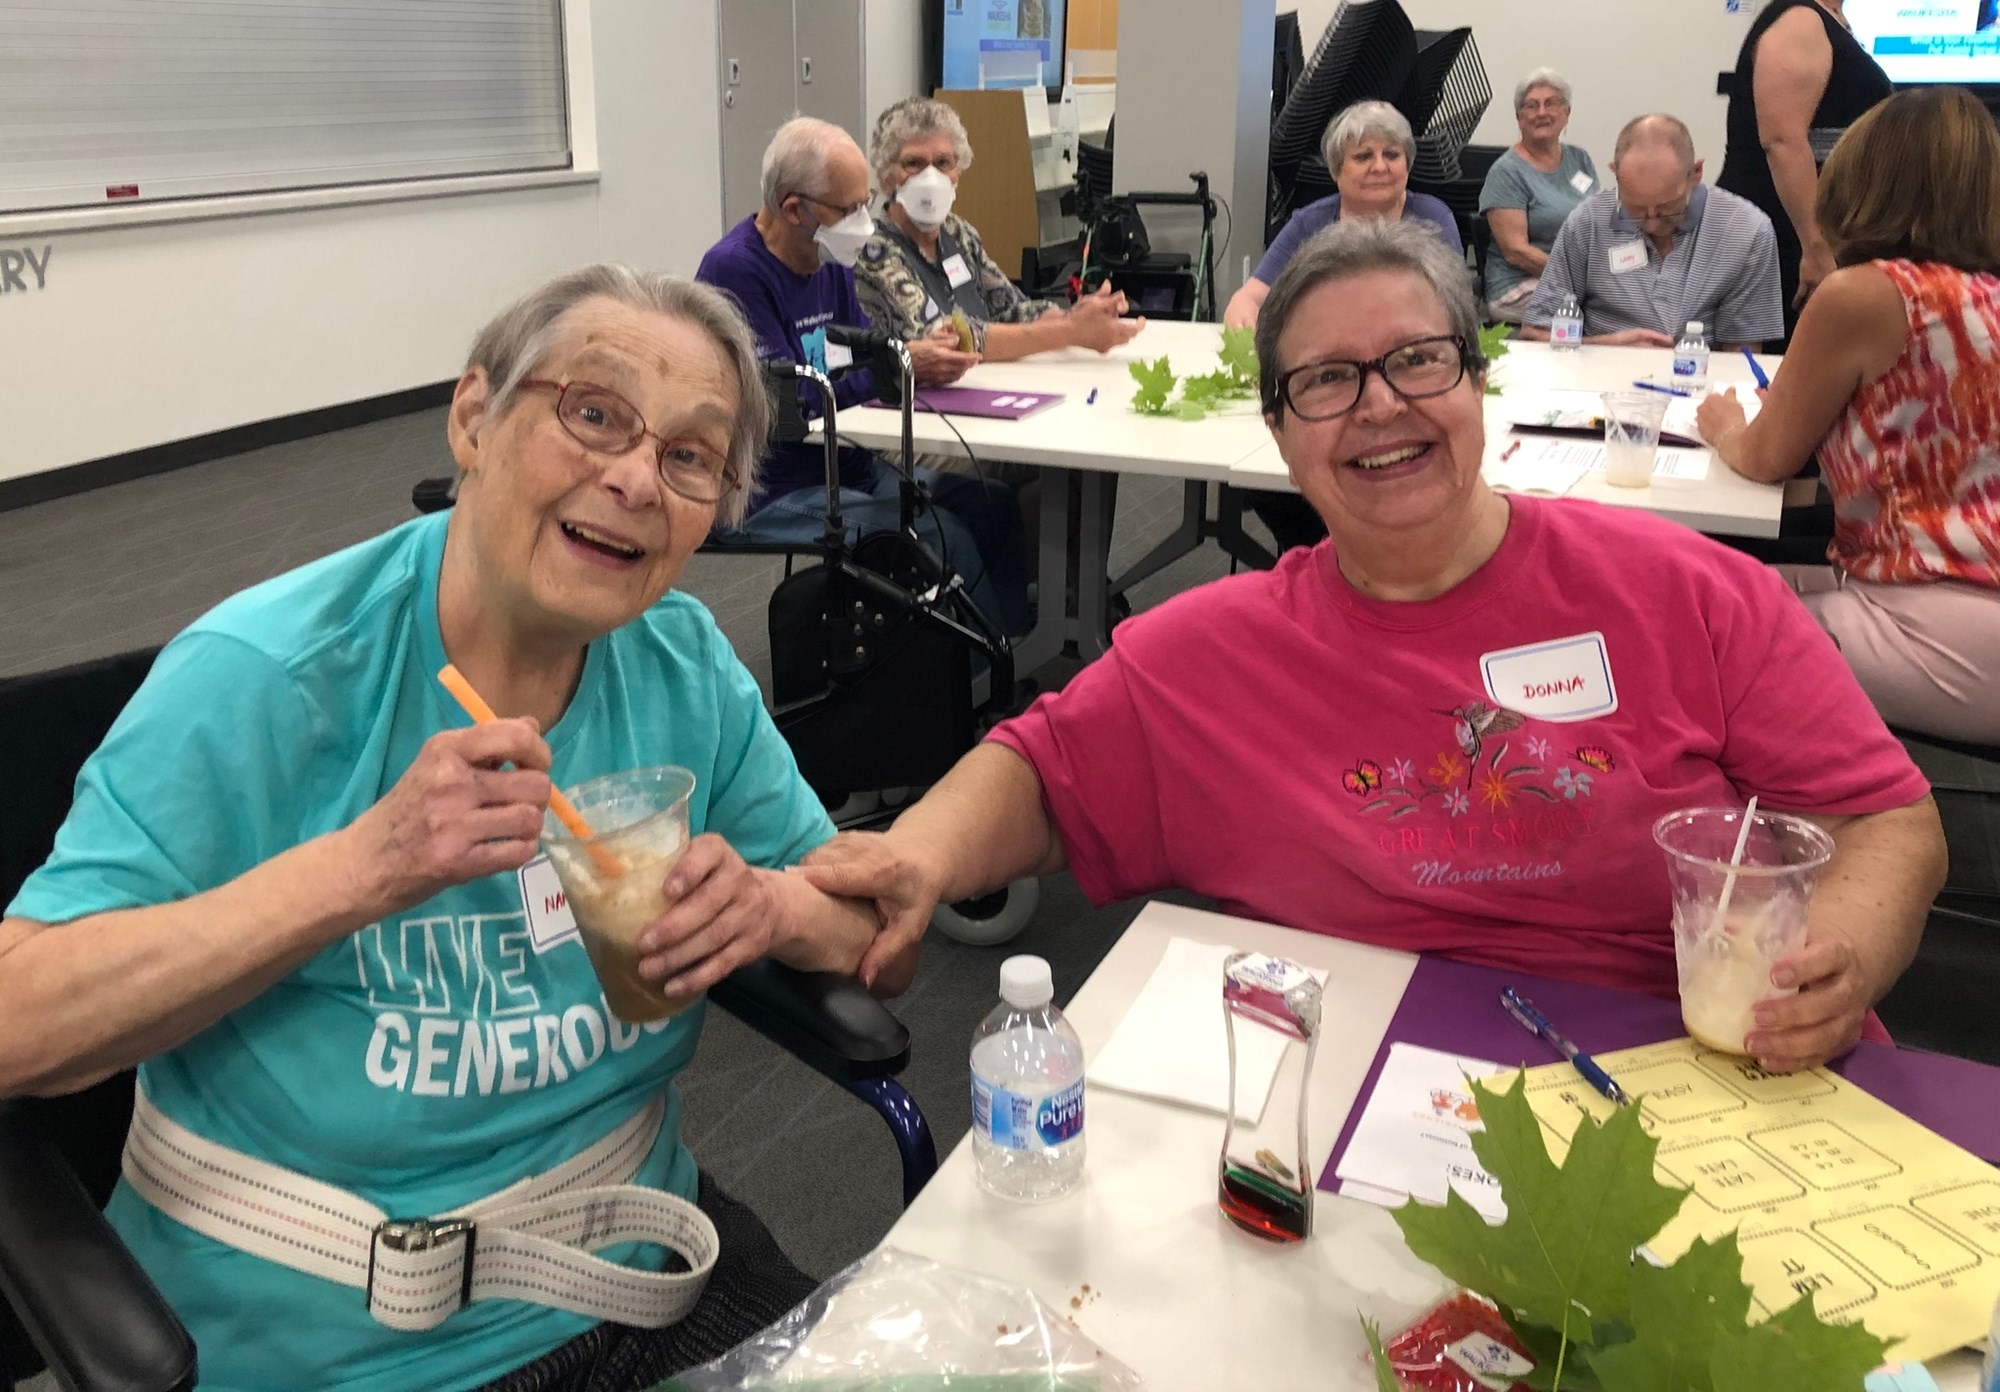 Two elderly people sit at a table holding plastic drink cups. They're attendees at a maple syrup program at the Library Memory Project. Plastic bottles, pieces of paper, and green maple leaves are on the table in front of them. A group of more elderly people are sitting at a table behind them.